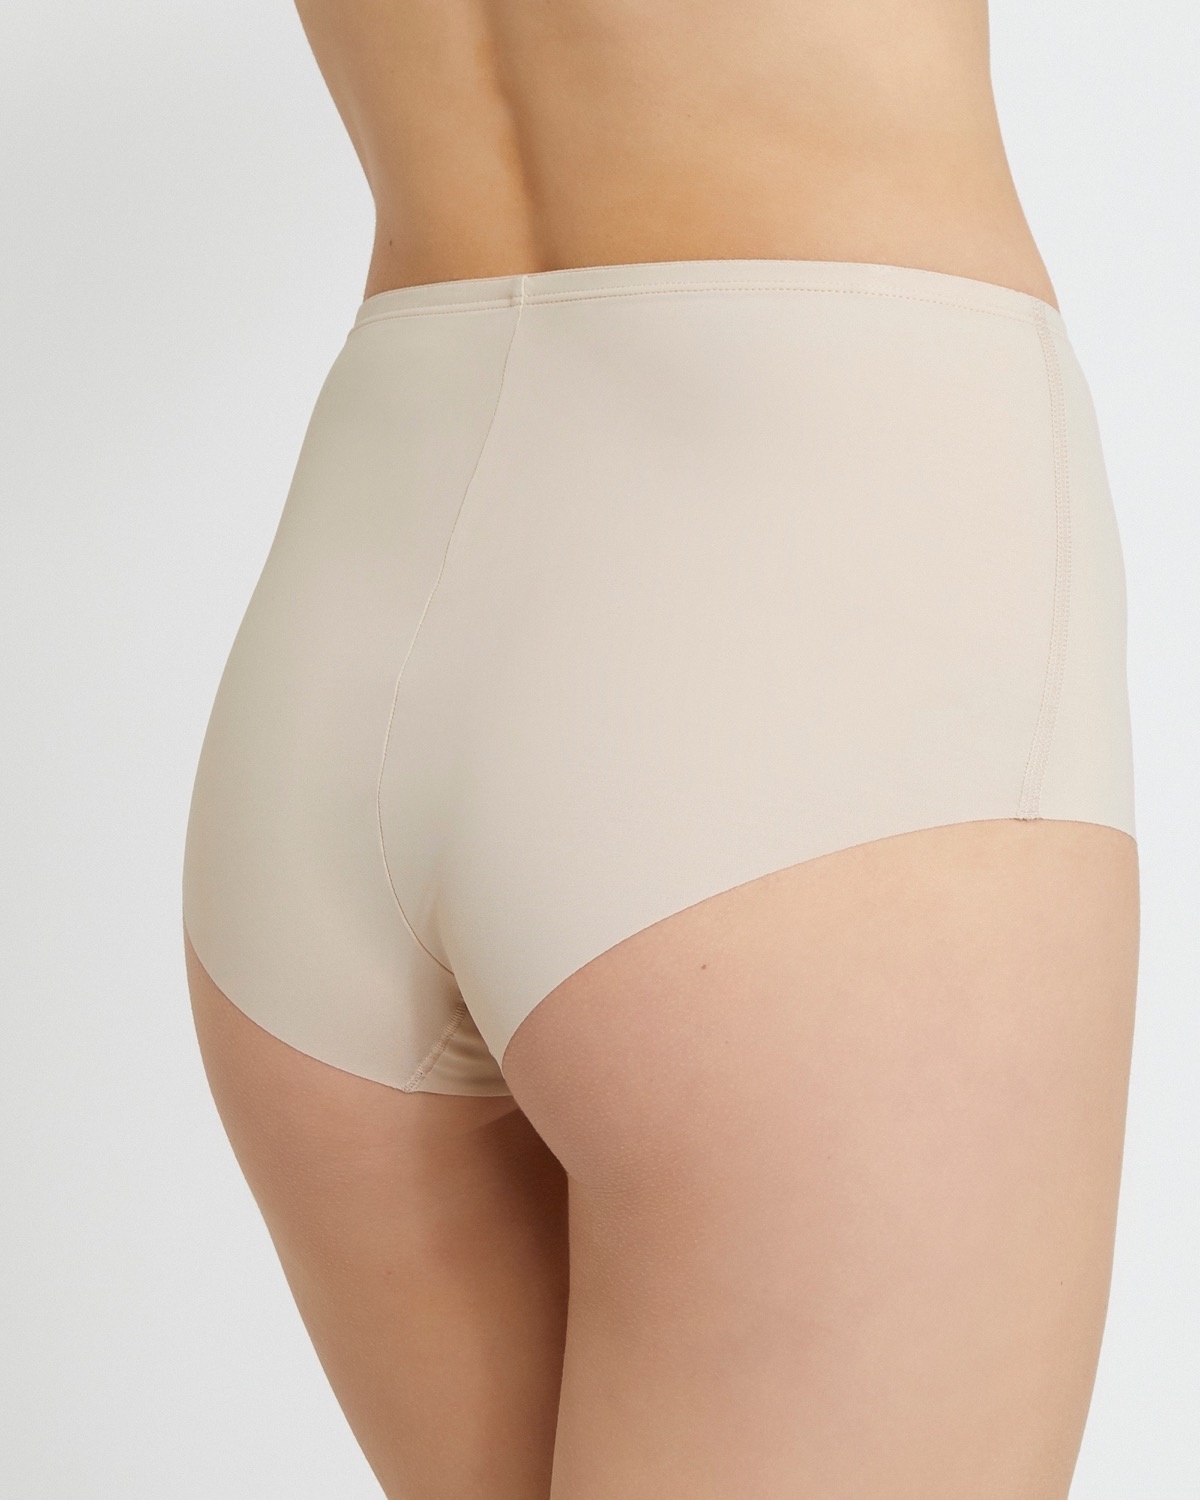 Undercover 3 Pairs Ladies No VPL Shorts BR731 Nude 10 : .co